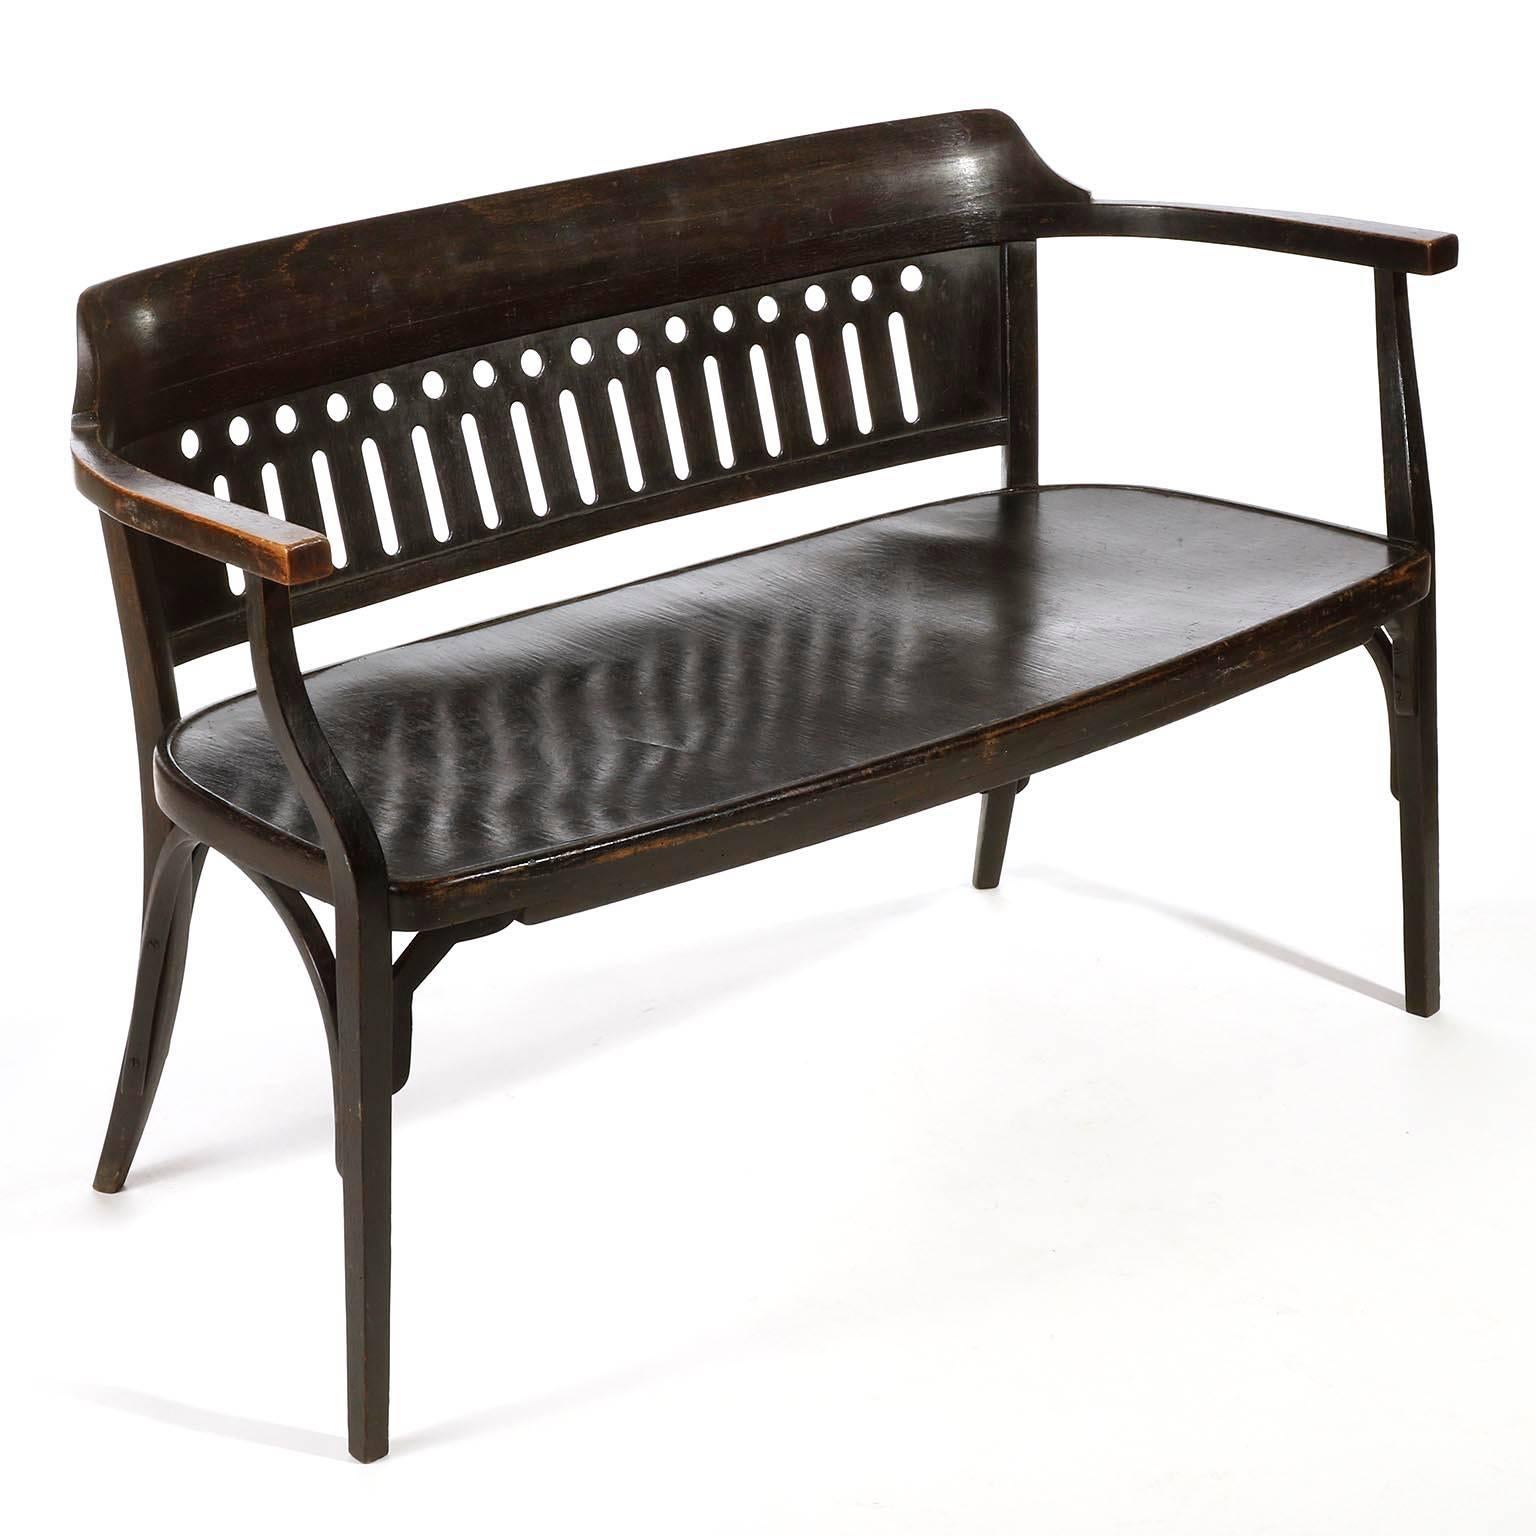 Early 20th Century Otto Wagner Settee Bench Bentwood, Thonet, Austria, Vienna Secession, circa 1905